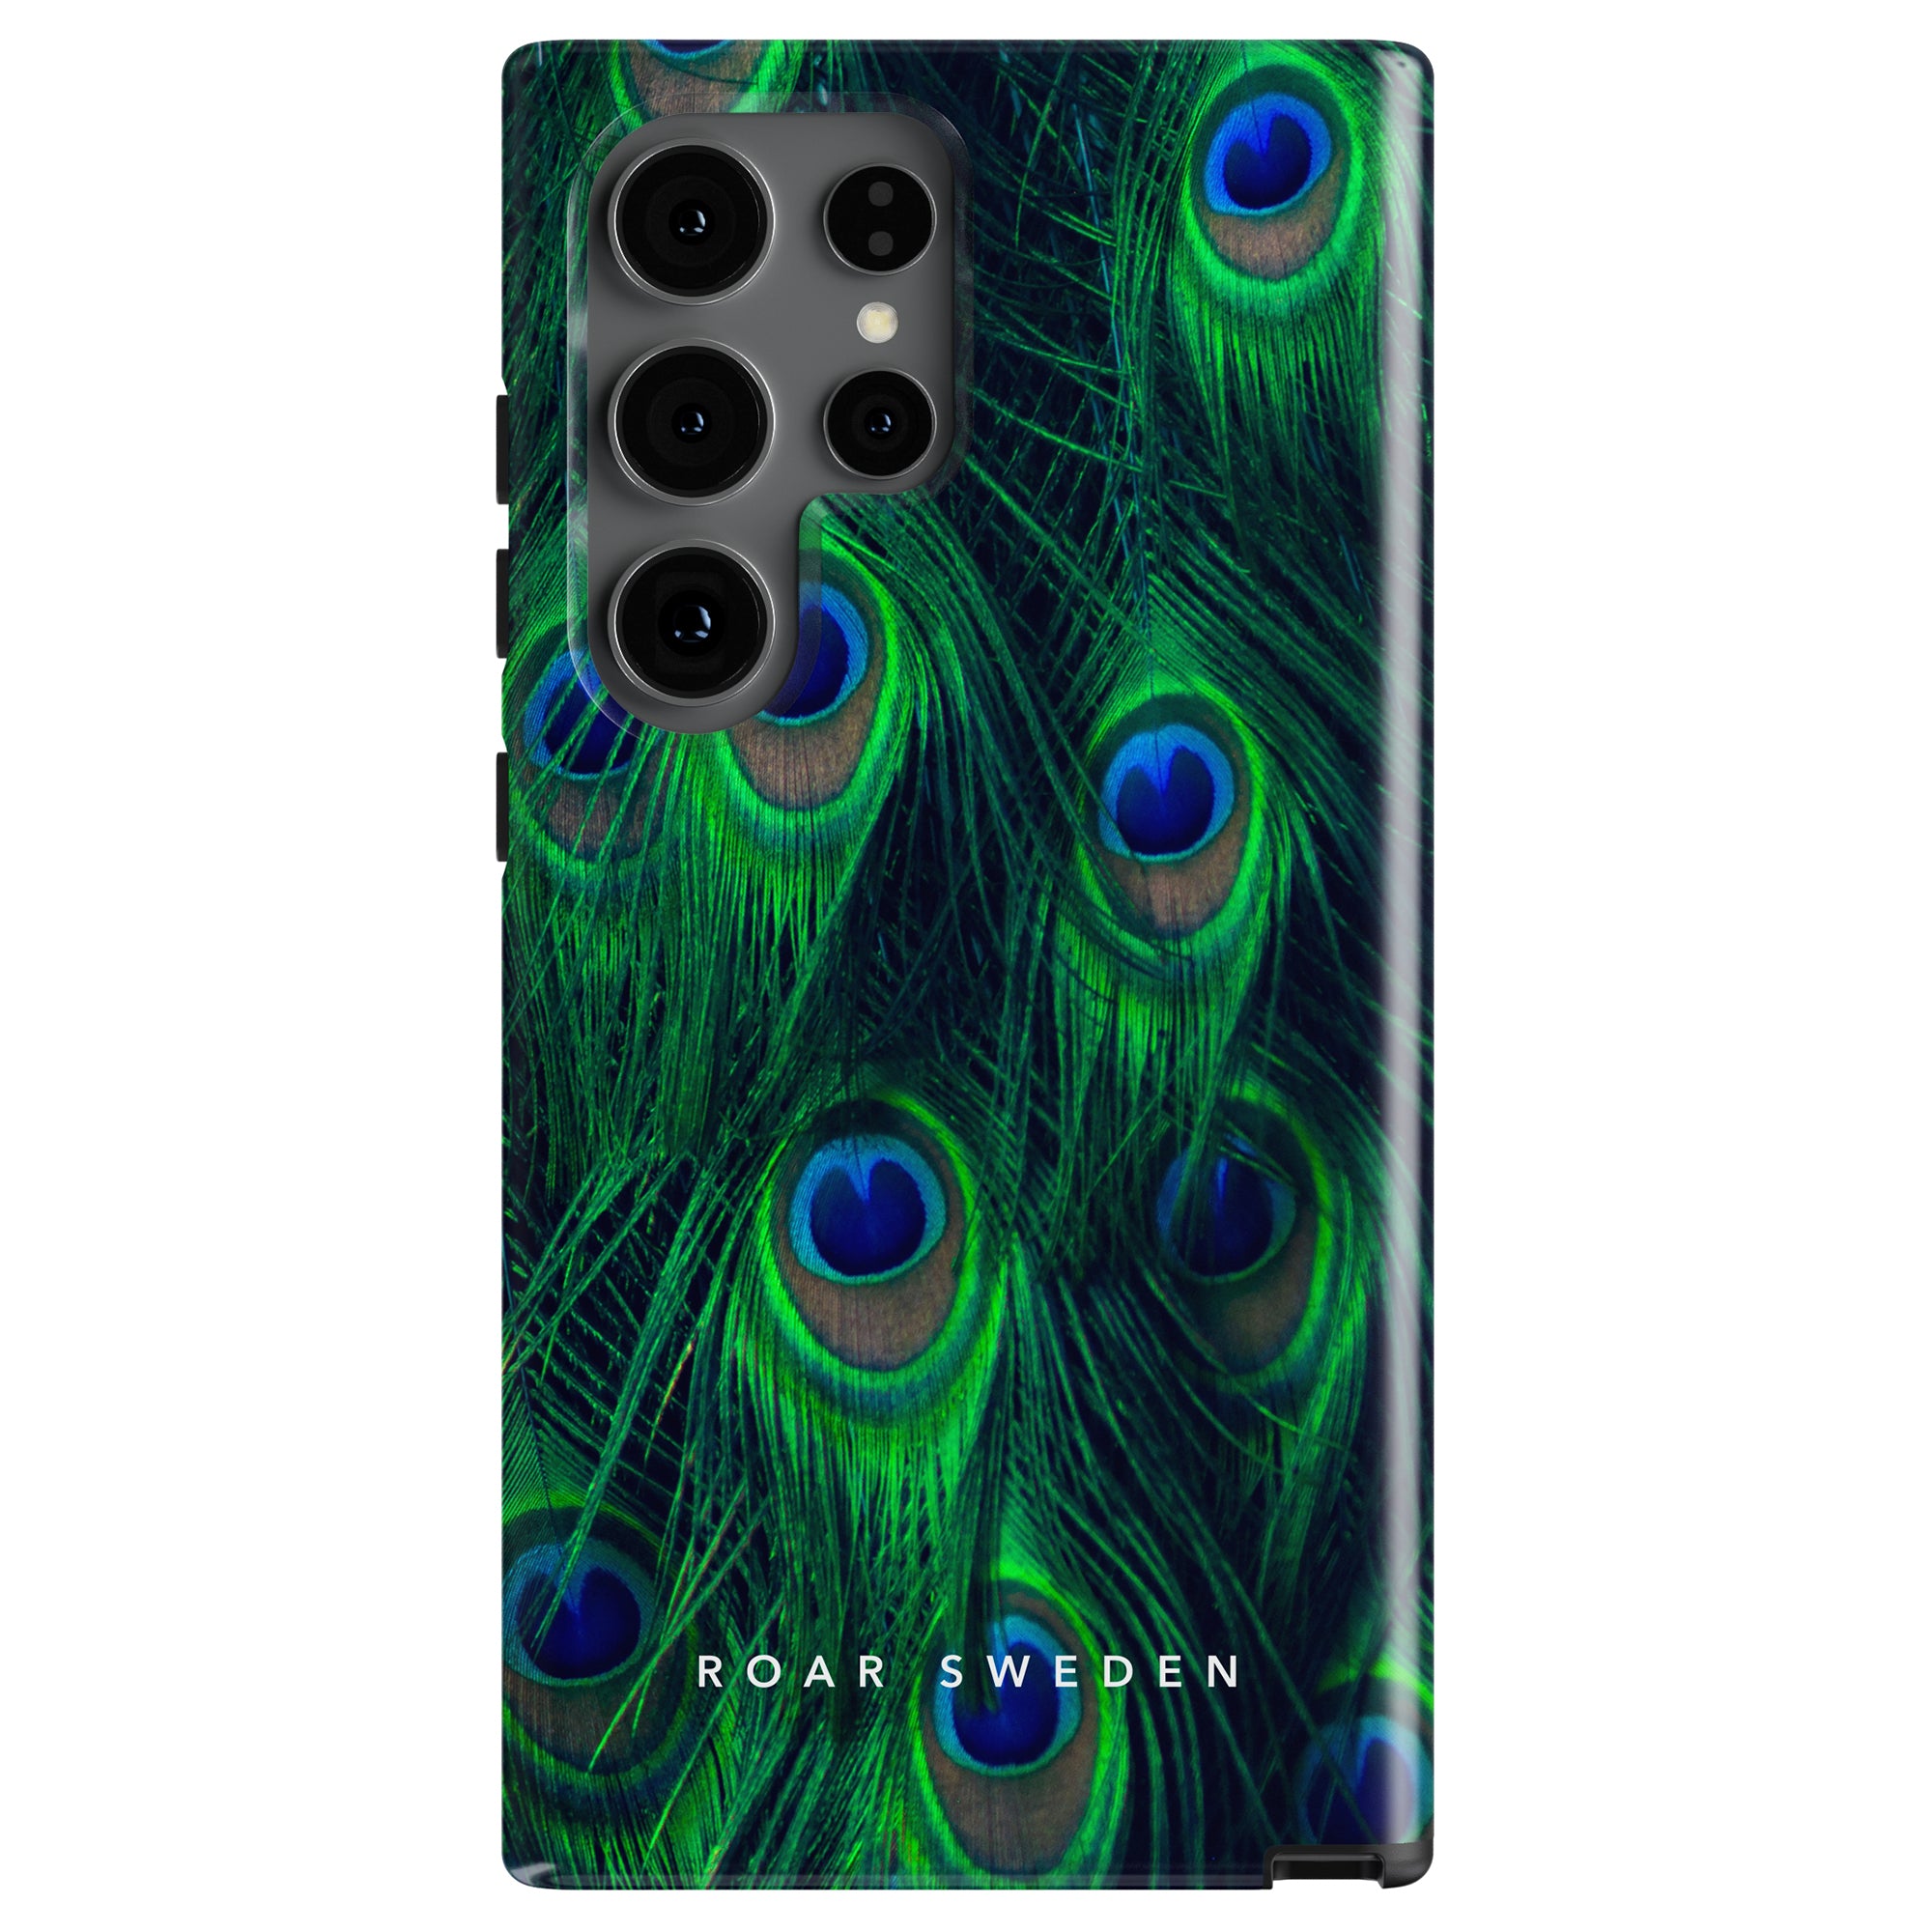 This mobilskal features a stunning design of green peacock feathers with intricate eye patterns and the brand name "ROAR SWEDEN" at the bottom, making it a perfect Peacock - Tough Case.